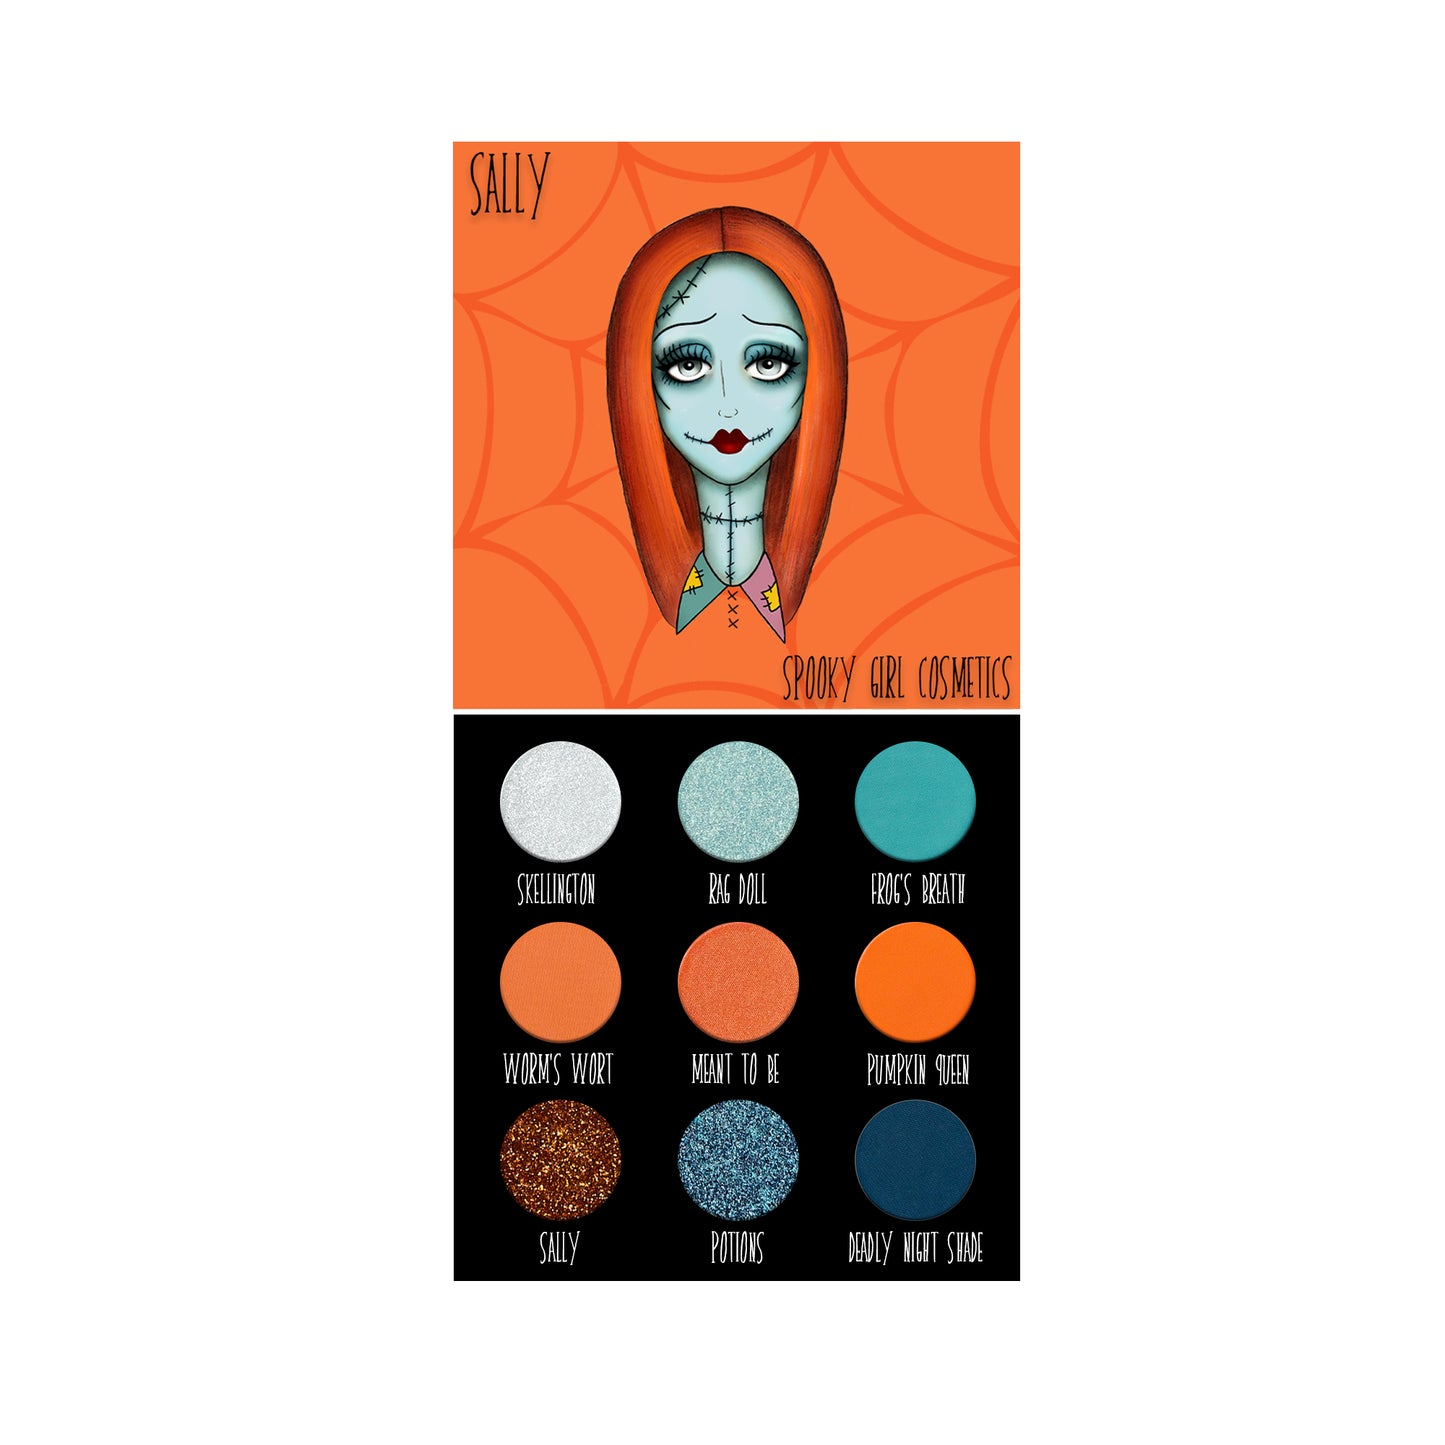 Spooky Girl Eyeshadow Palette inspired by Sally